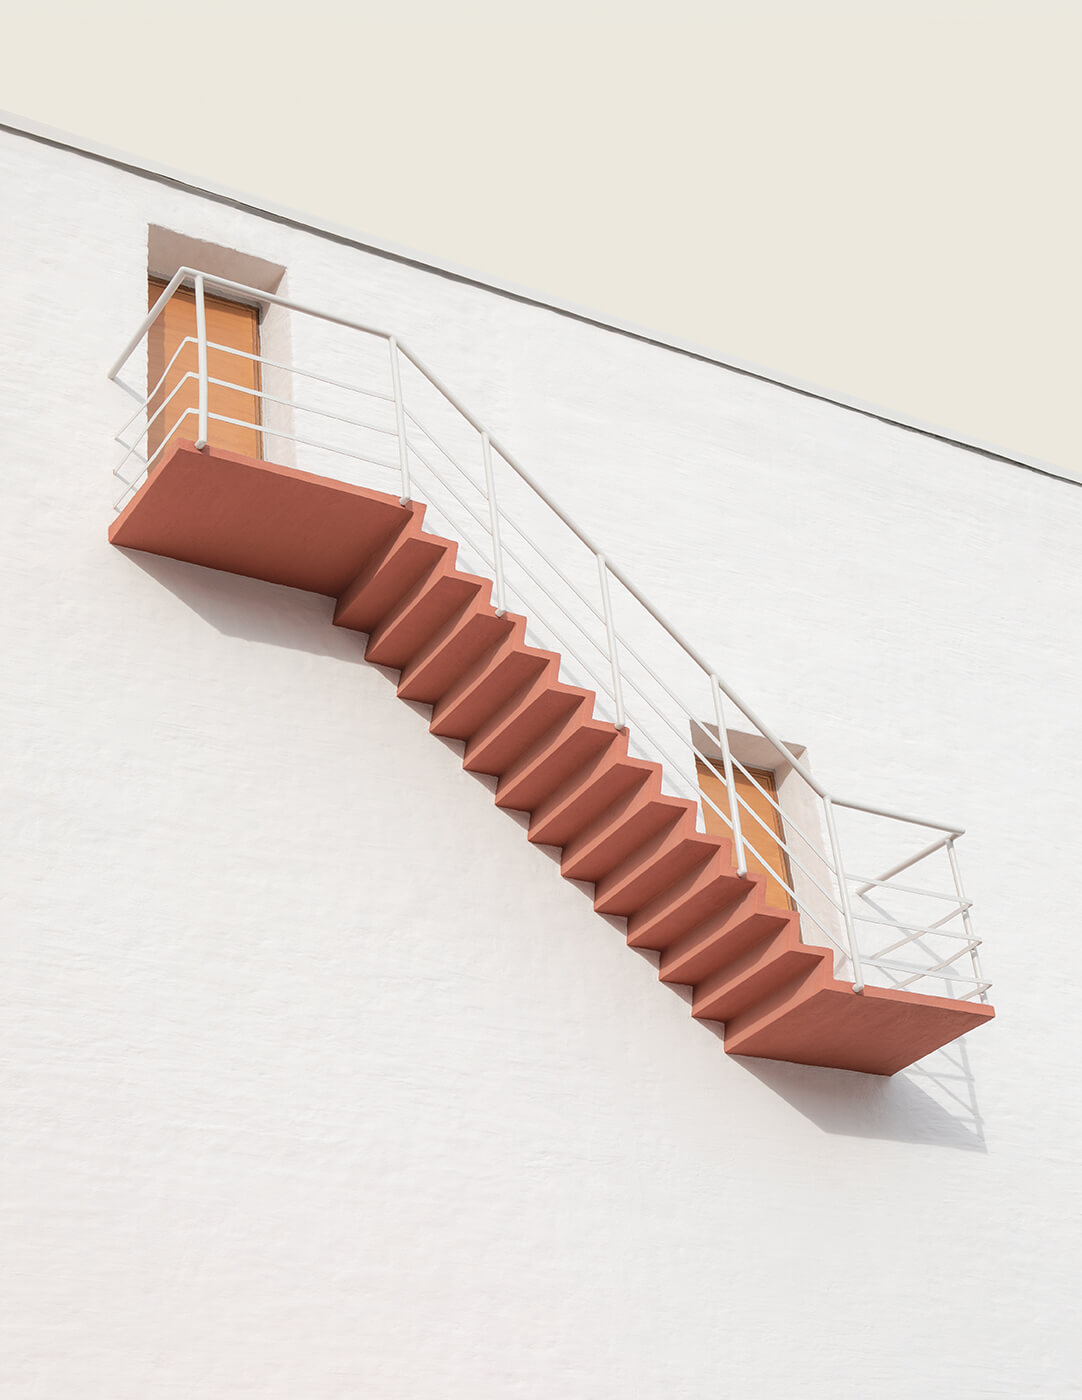 A minimalistic architectural image of two doors and a stair outside a building